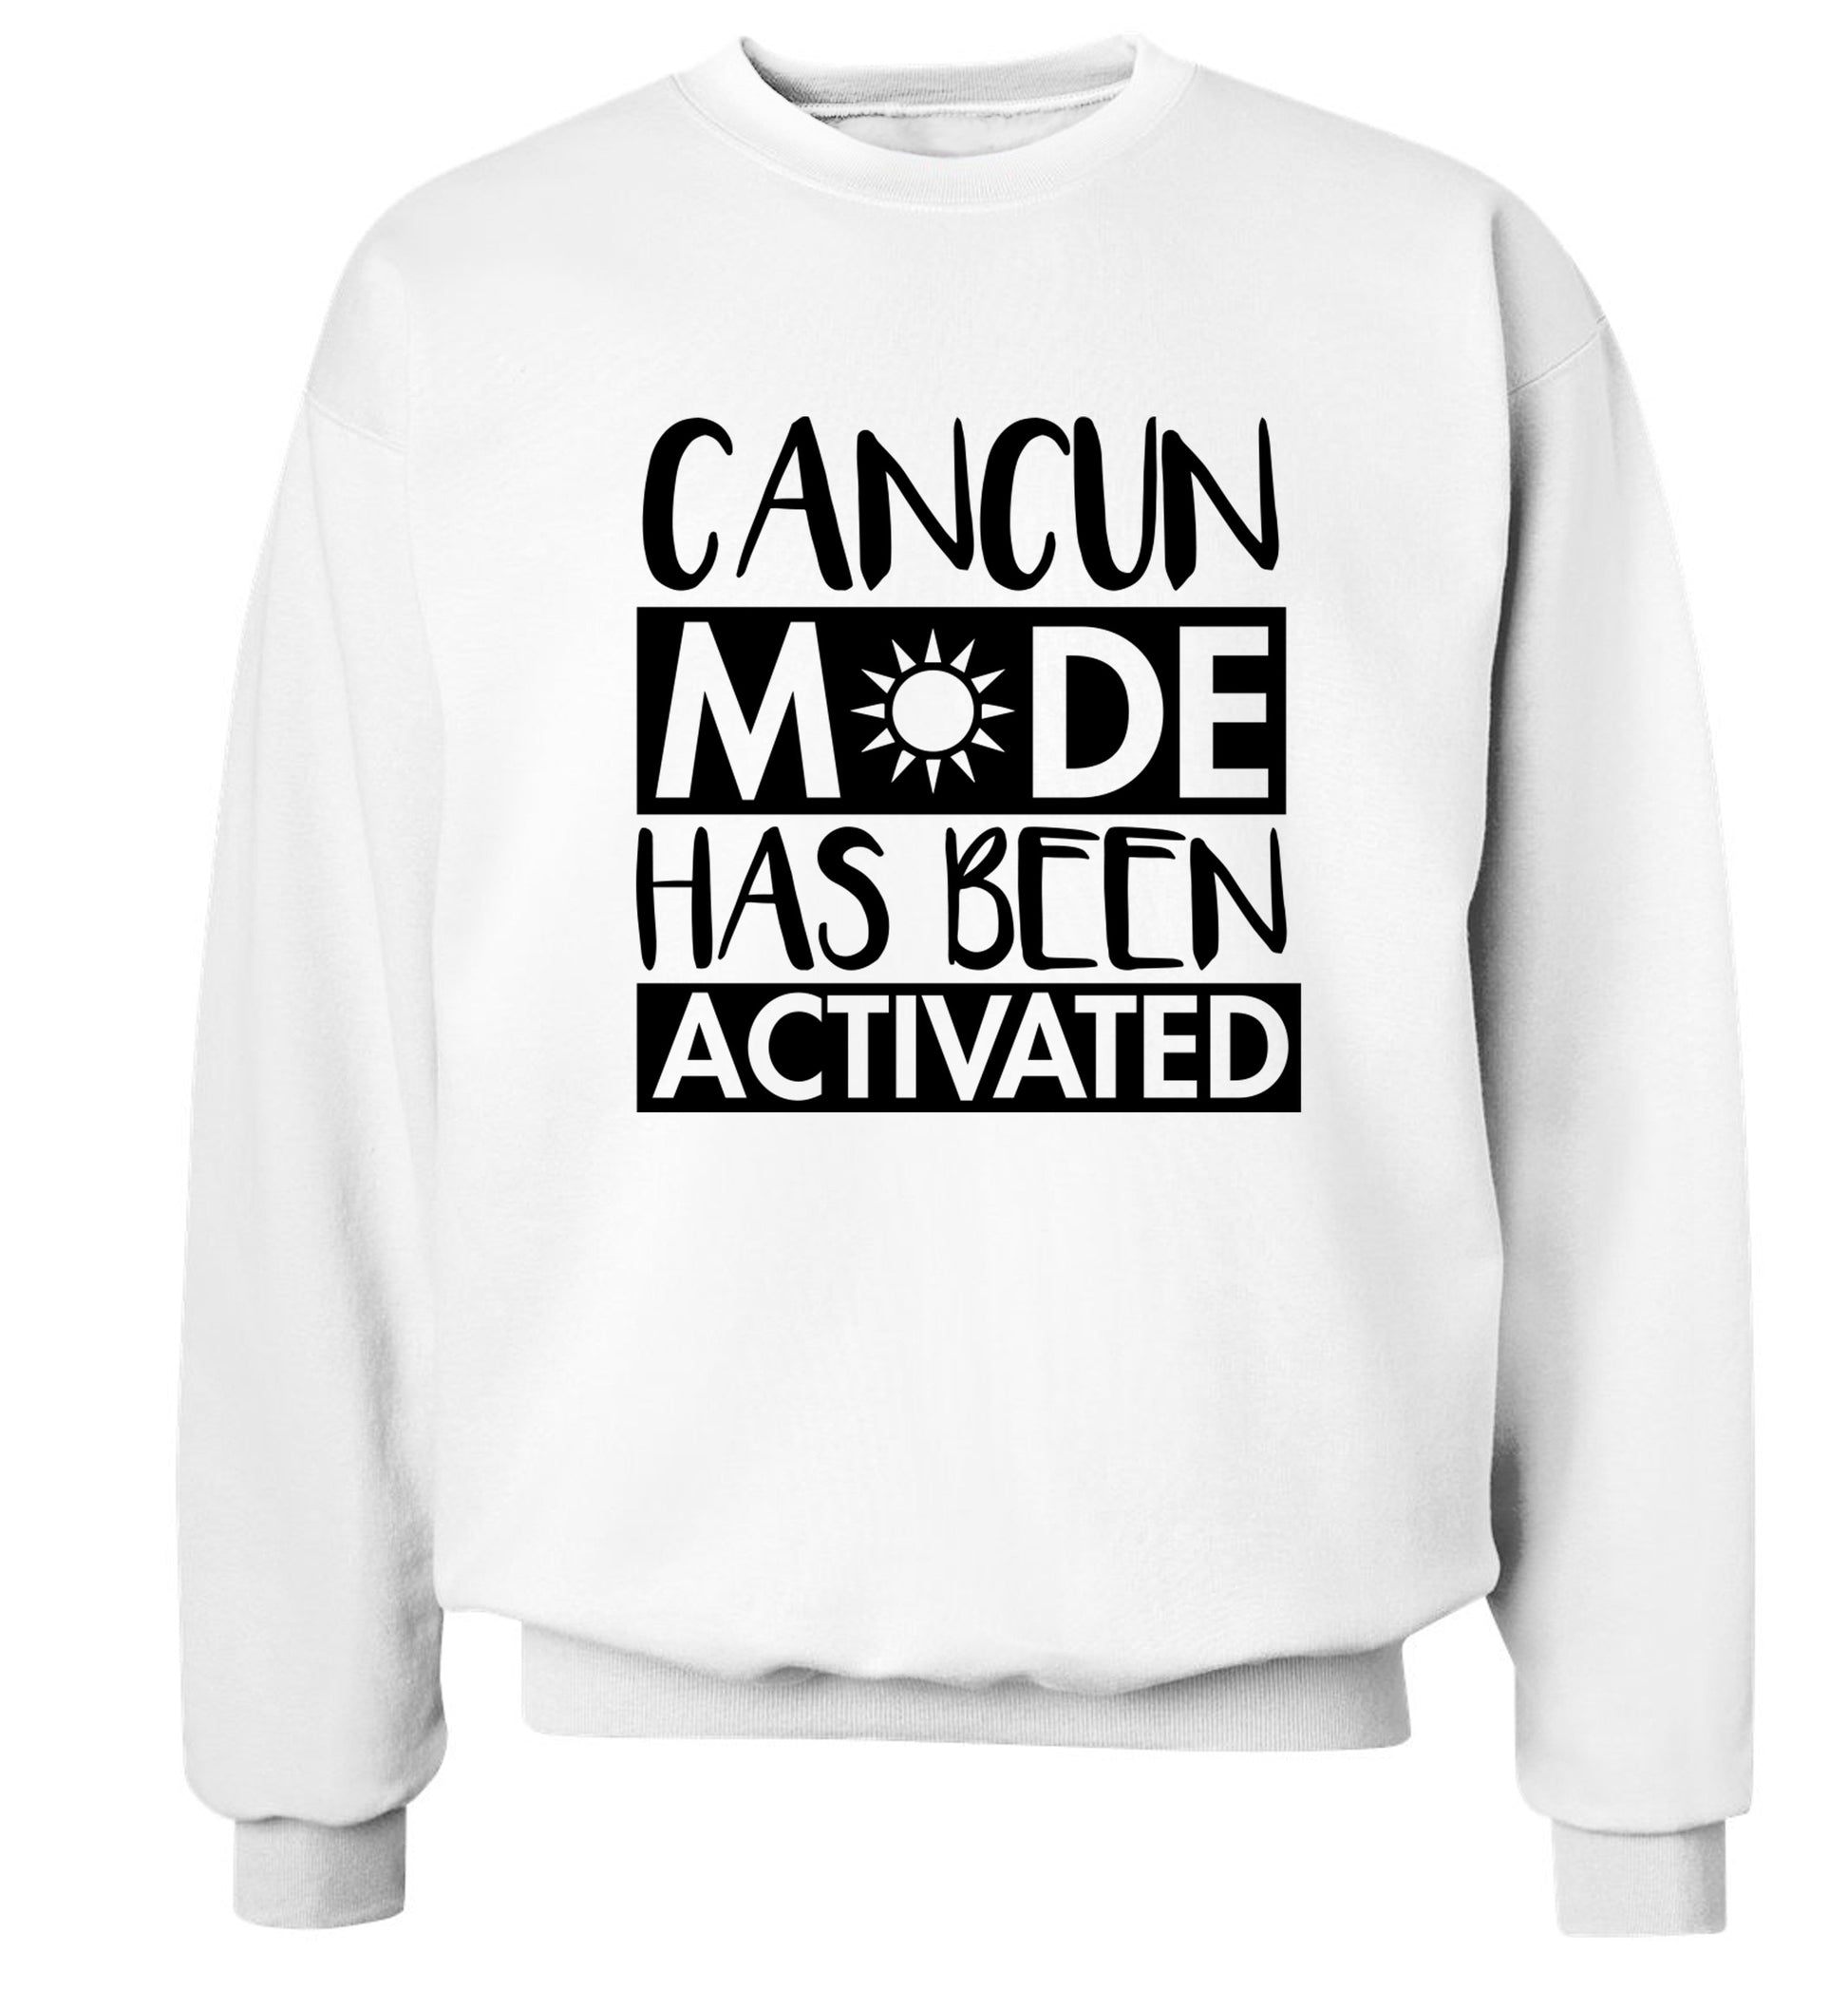 Cancun mode has been activated Adult's unisex white Sweater 2XL